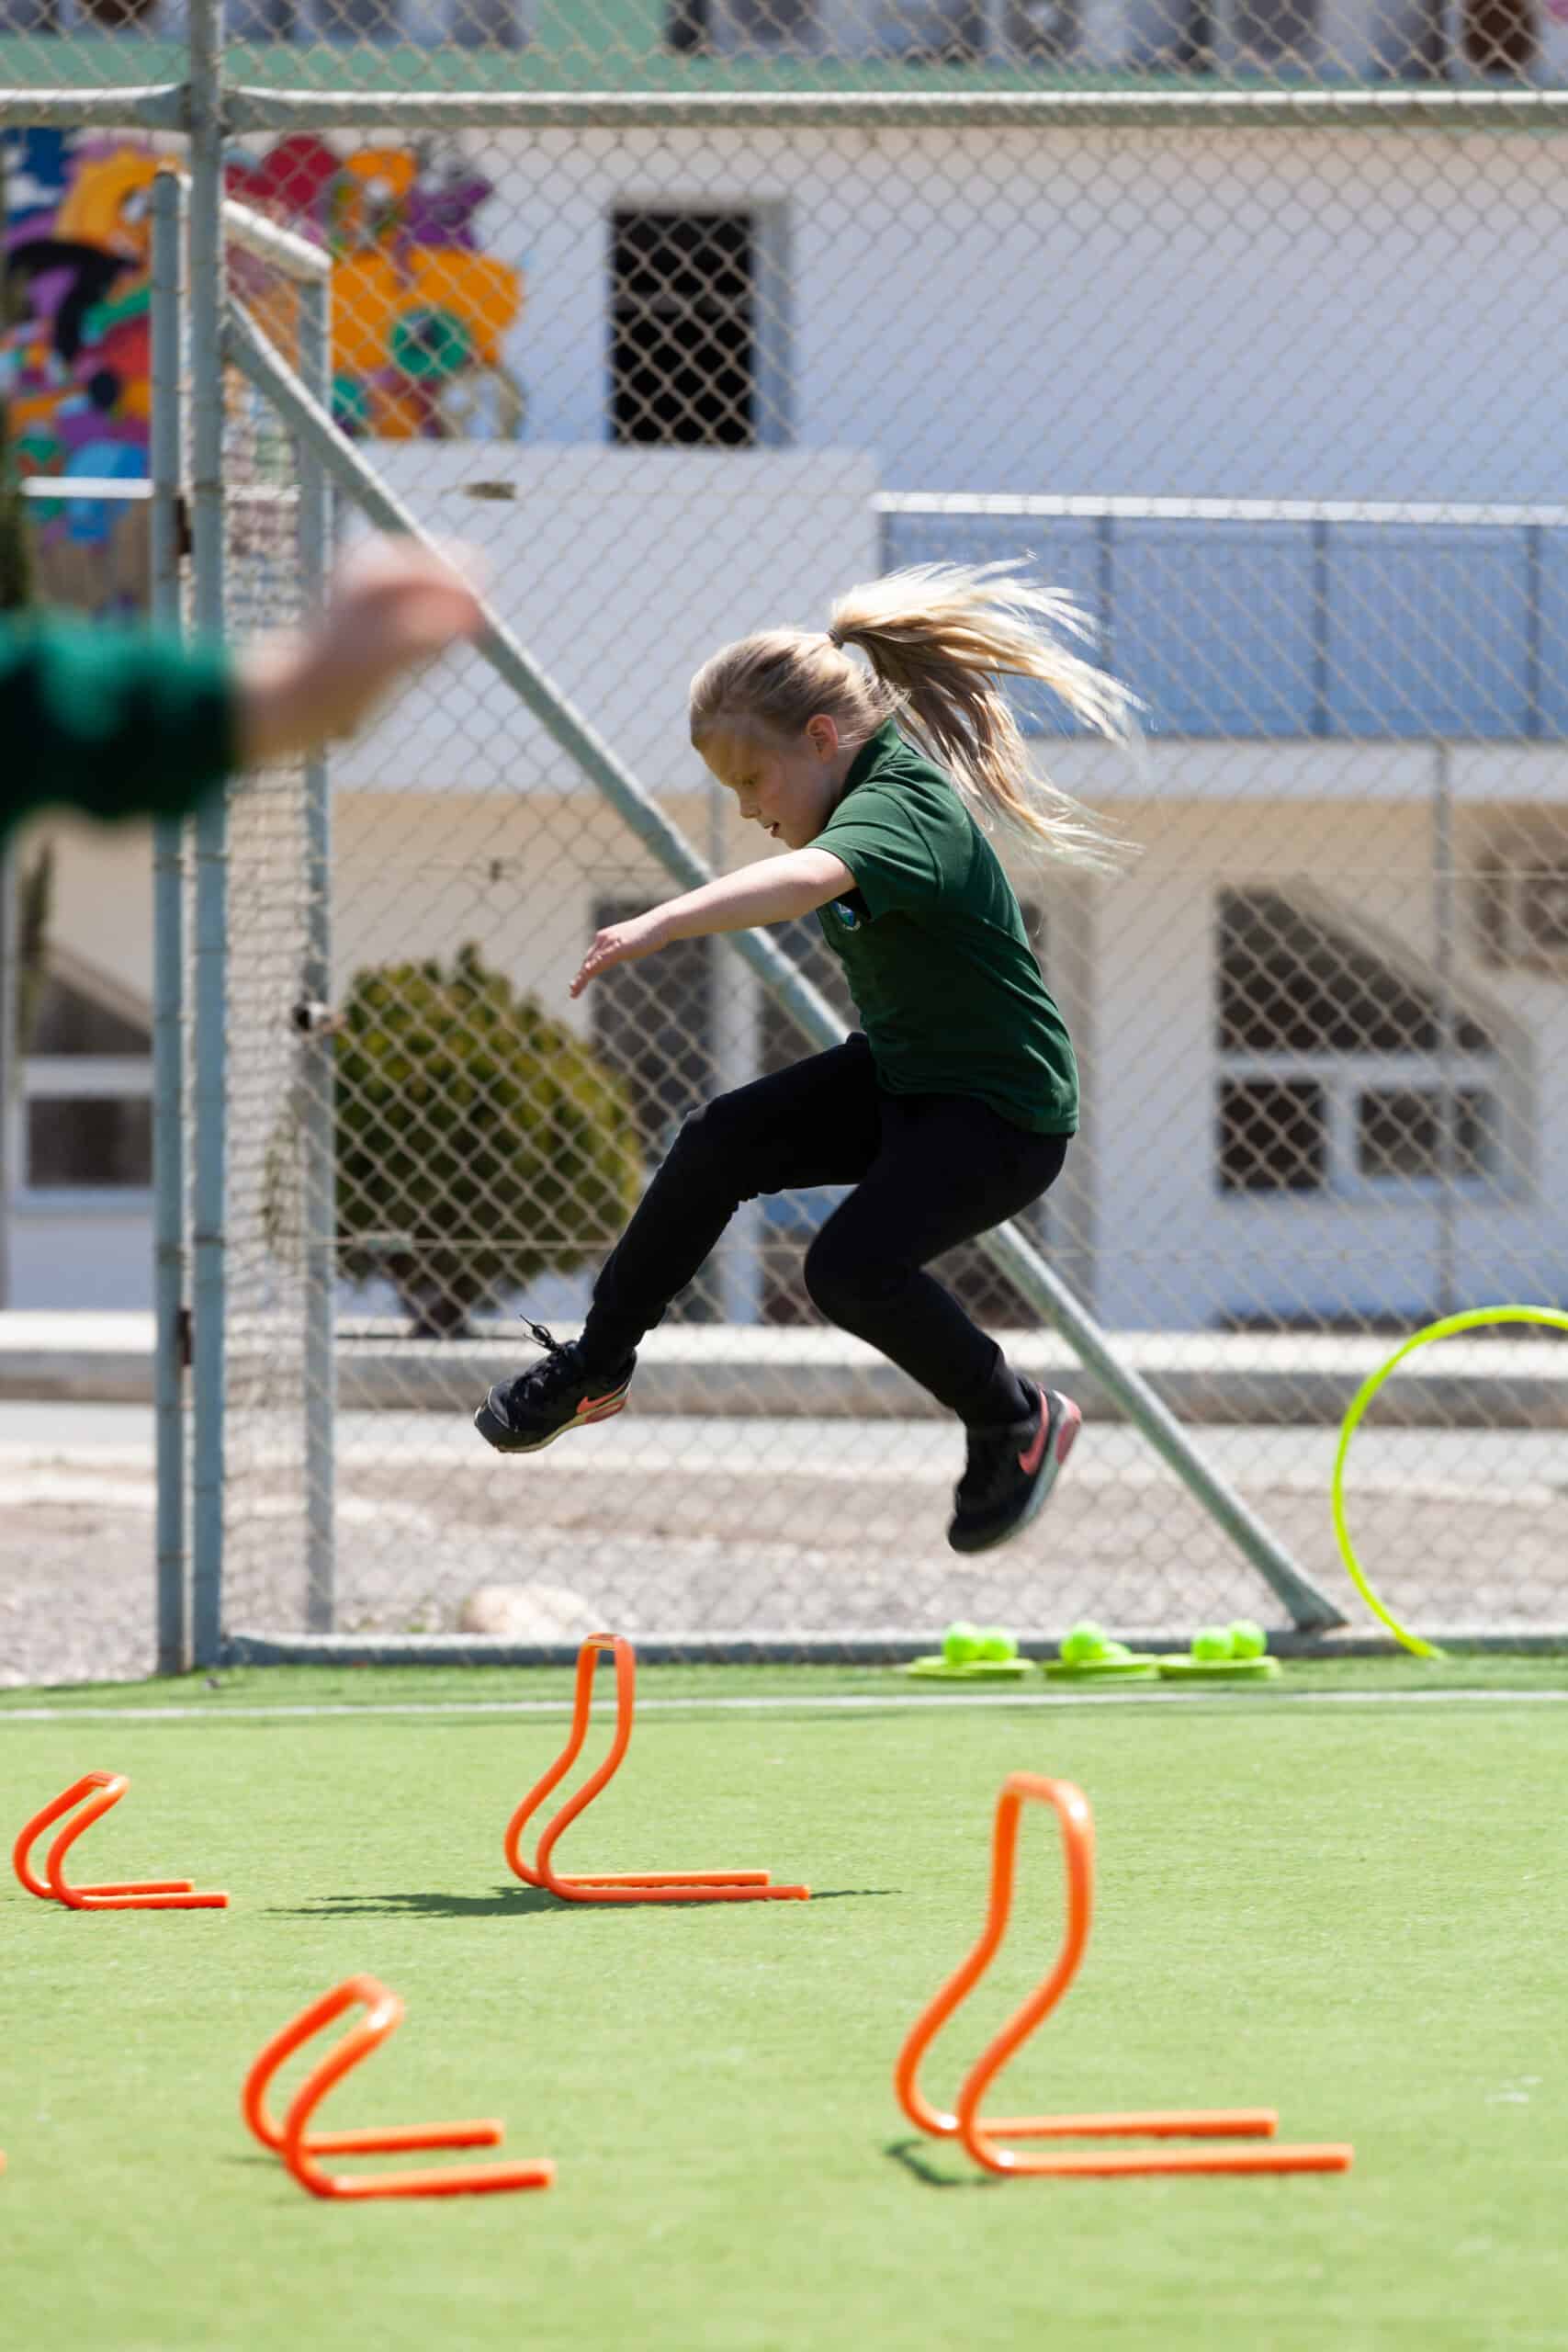 Aspire Private British School Paphos Cyprus - Aspire KS2 sports day 12.04.21 36 of 168 scaled